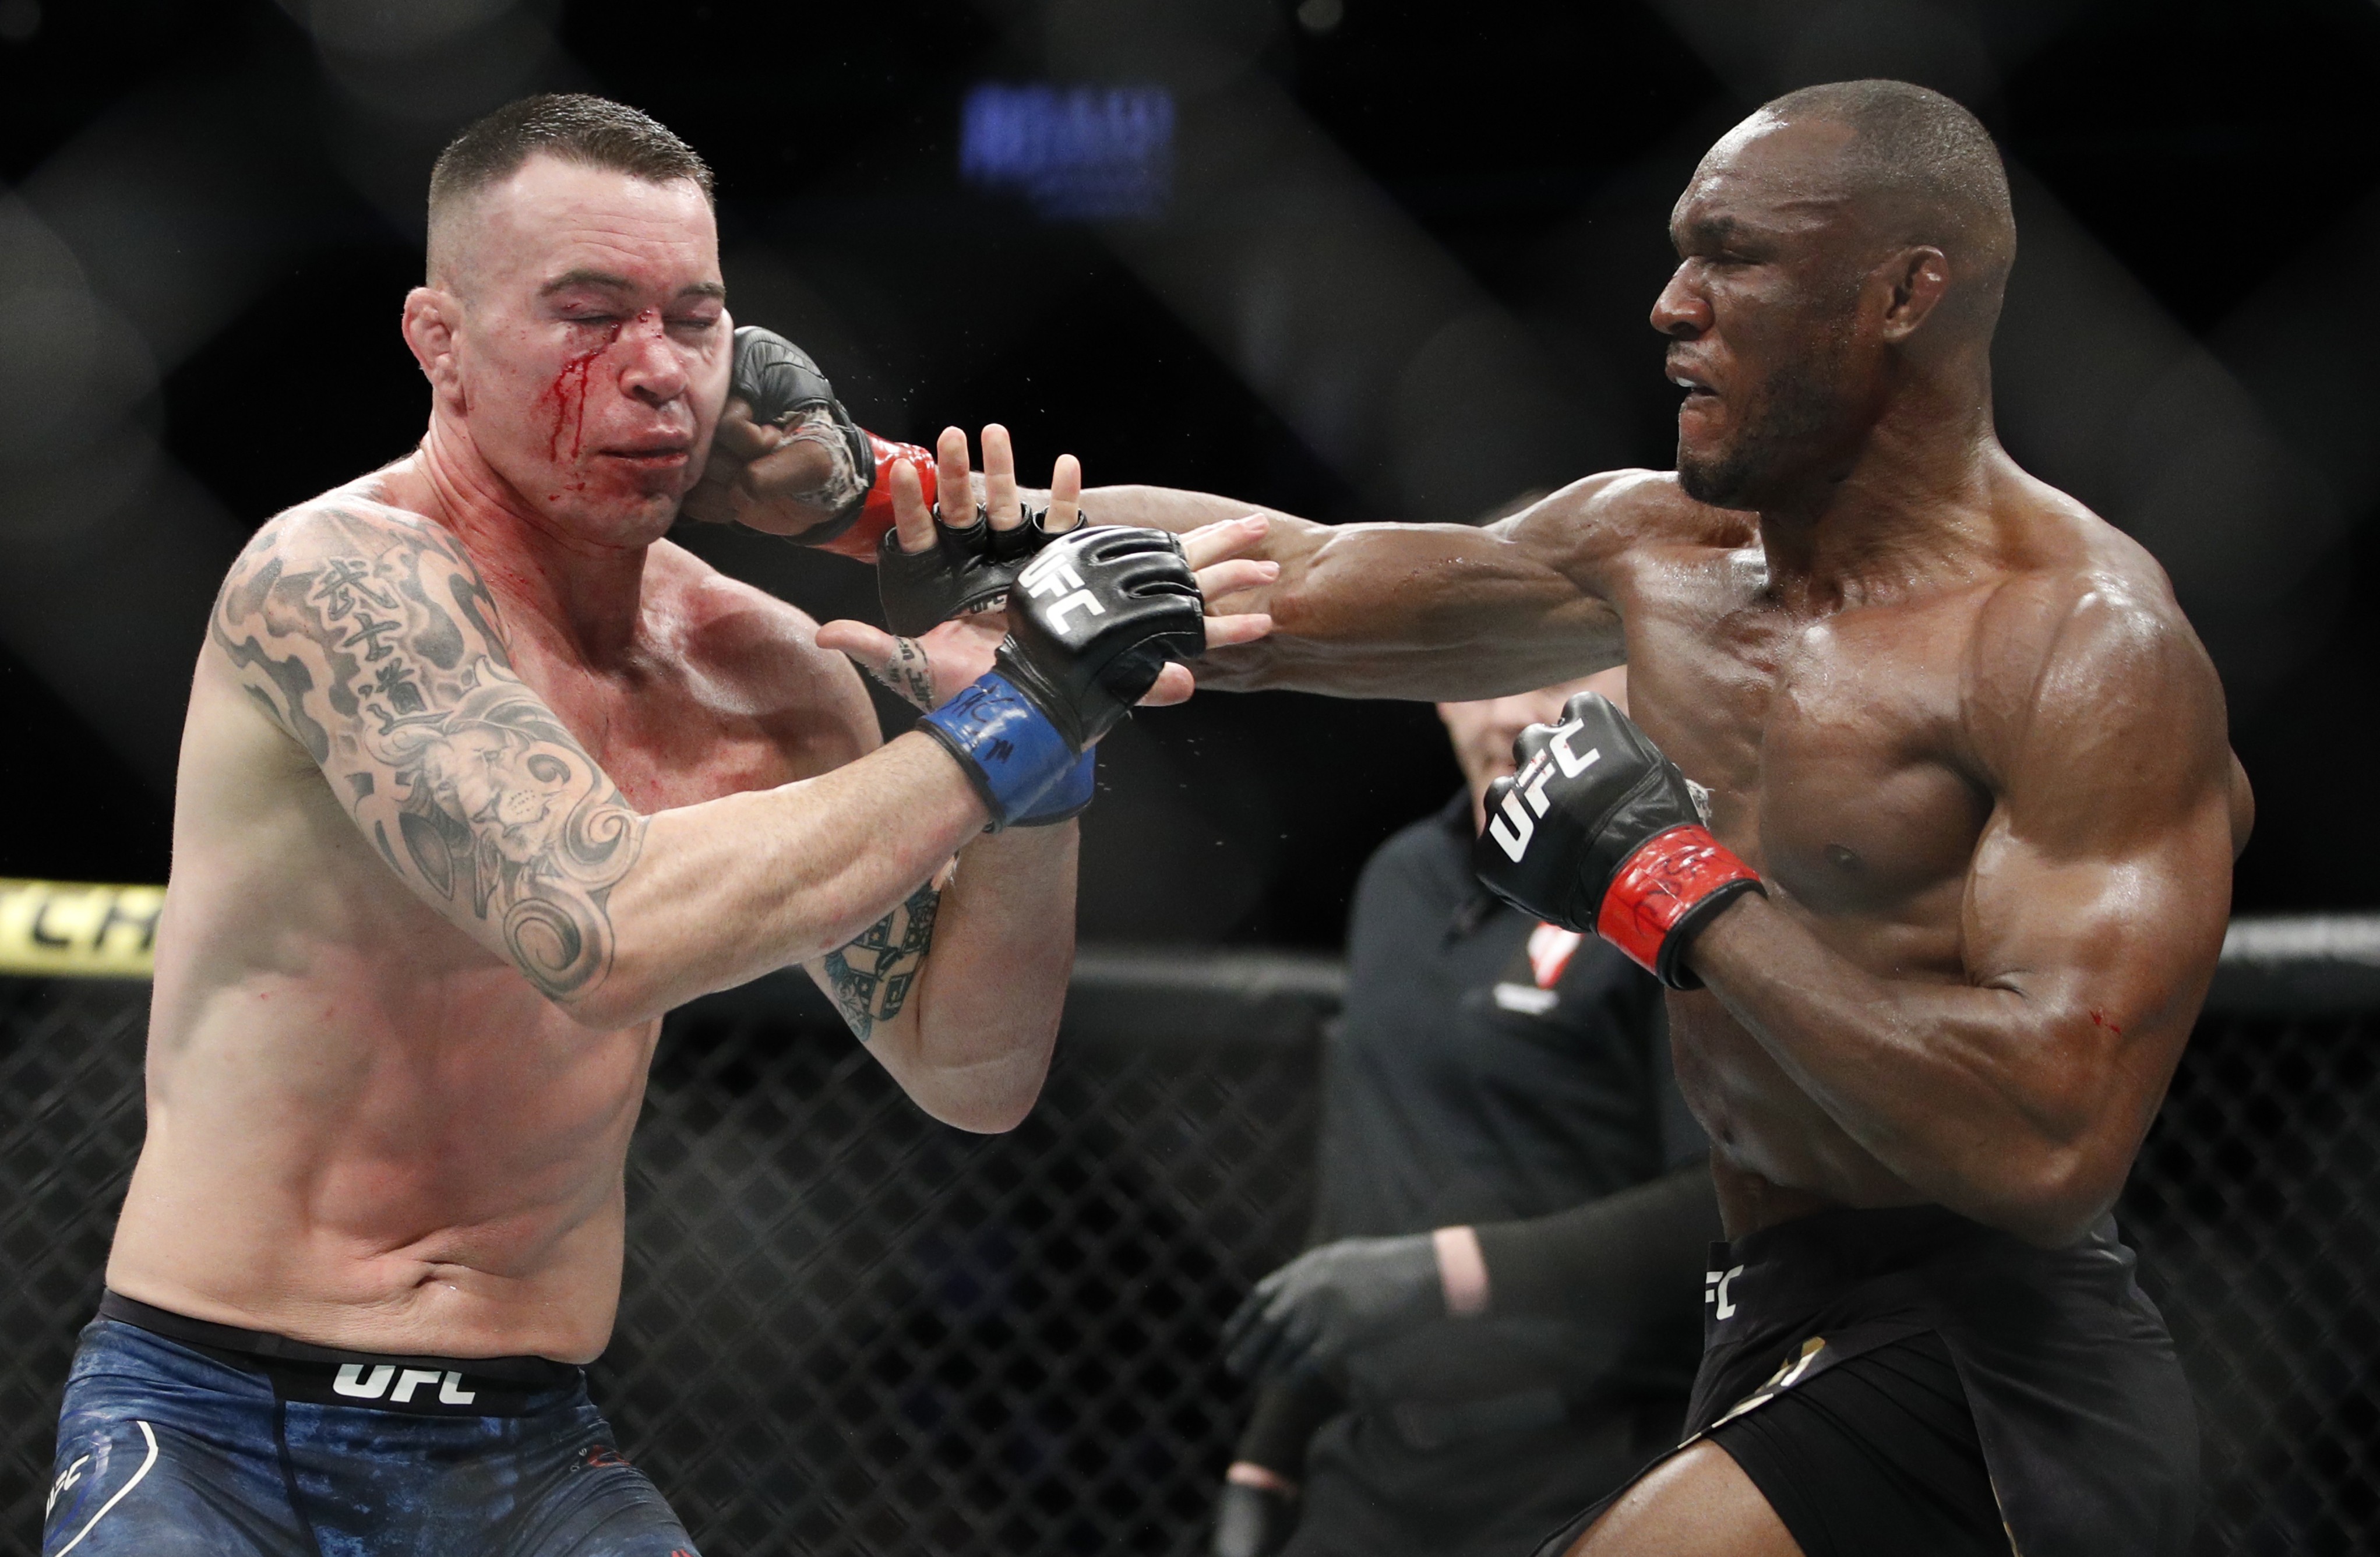 Kamaru Usman (right) hits Colby Covington in their welterweight championship fight at UFC 245 in December. Photo: AP